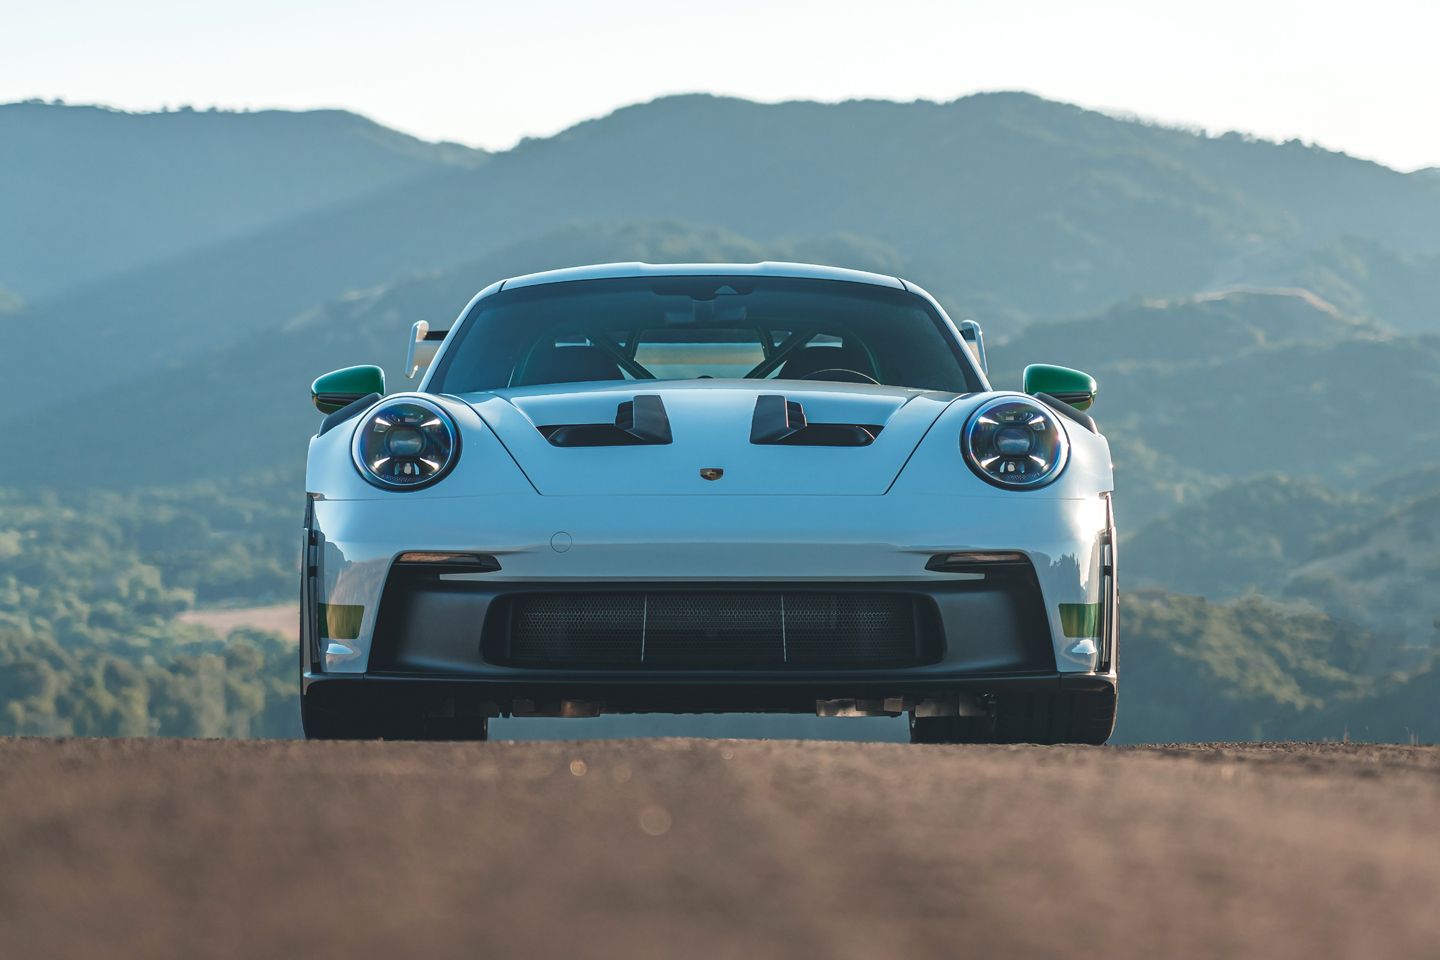 Porsche keeps things au naturel with hot, new 911 GT3 RS